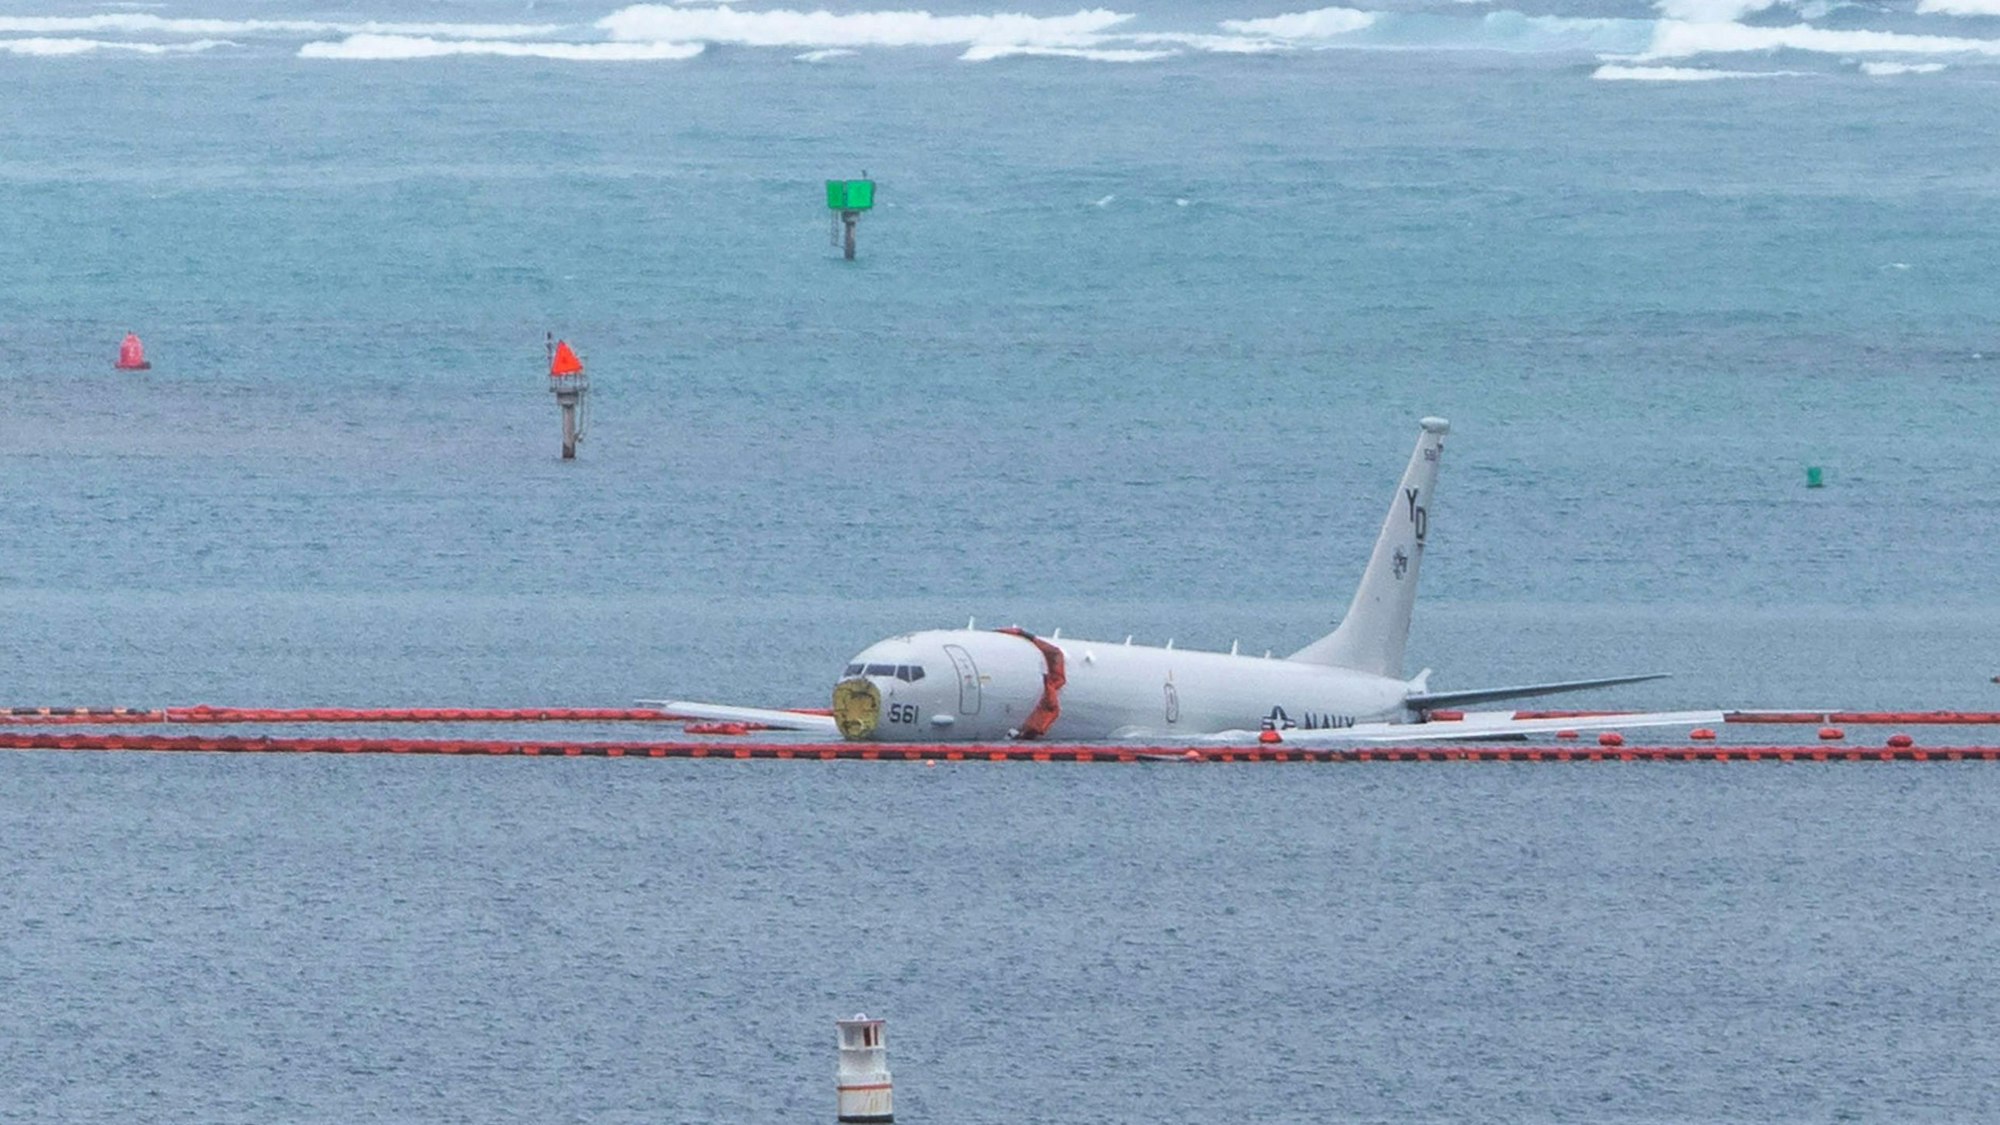 A military aircraft lies in the shallow waters of Kaneohe Bay after skidding off the end of the runway at Marine Corps Hawaii in Kaneohe on November 20, 2023. The aircraft is a Boeing P8 Poseidon, described as a military surveillance and patrol aircraft. Authorities confirmed the nine people on board made it to shore uninjured. The crew was conducting routine training at the time, according to military officials. (Photo by Eugene Tanner / AFP)